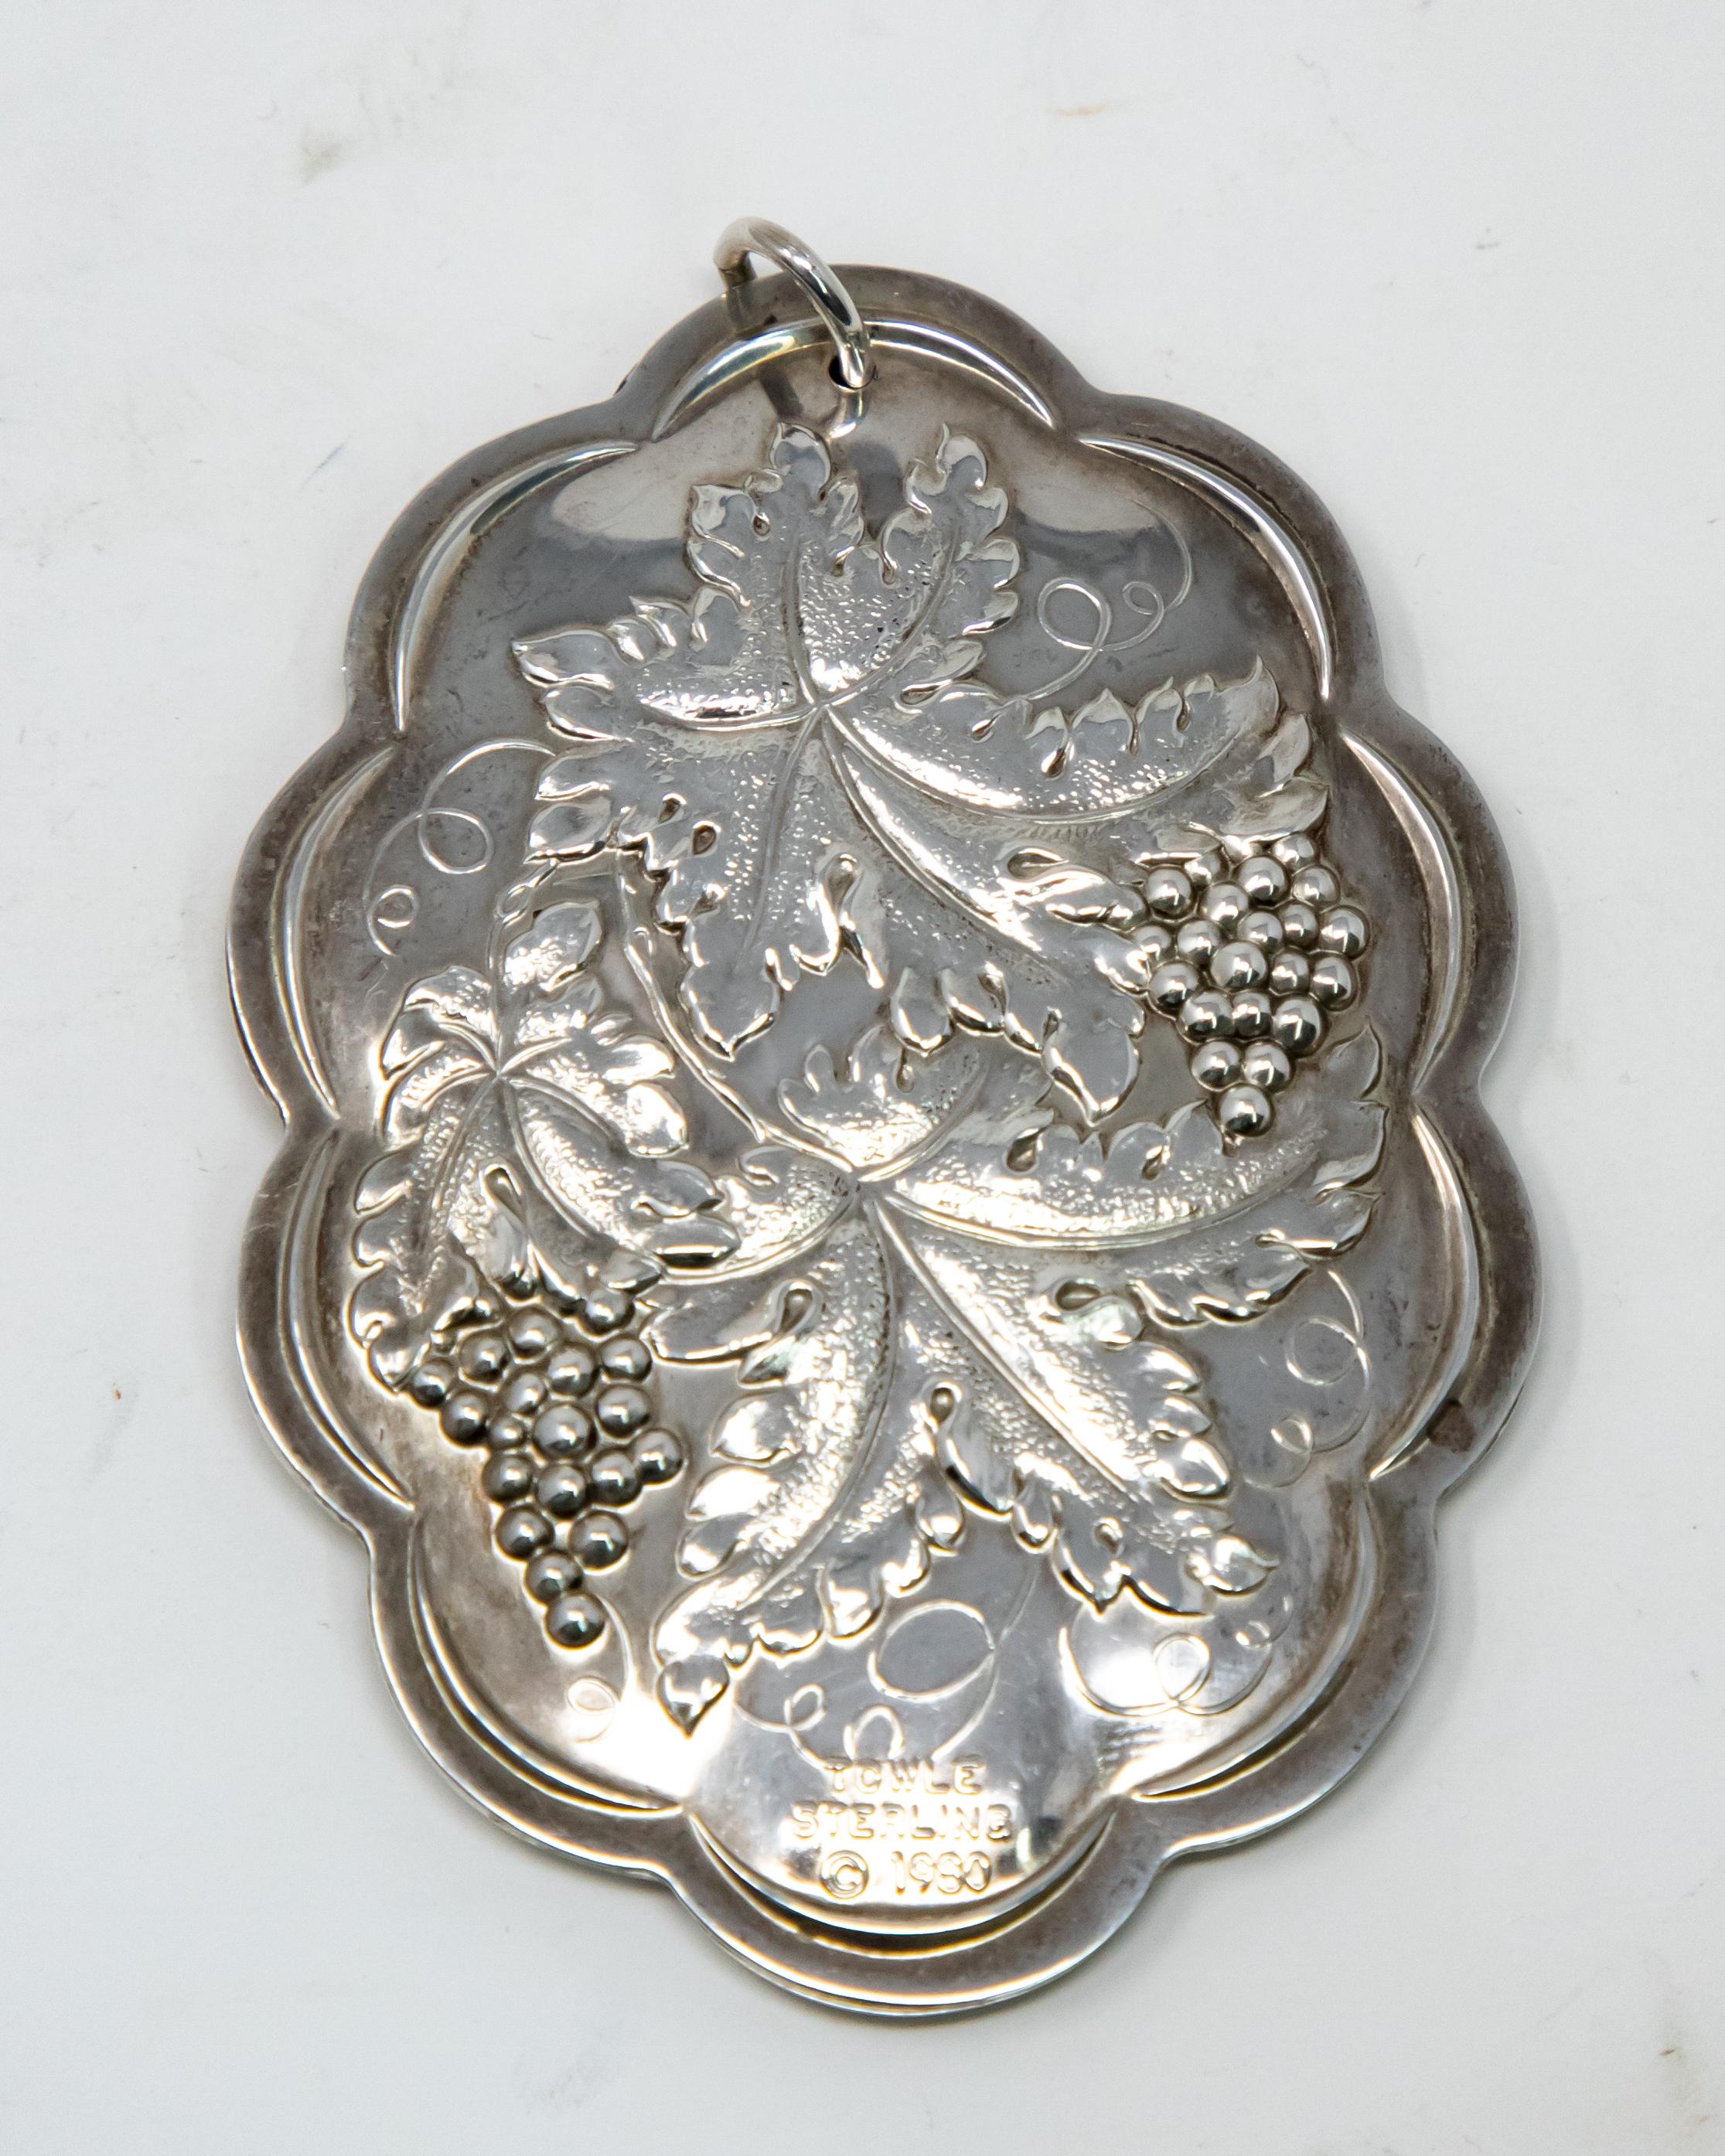 Offering this beautiful Towle sterling ornament from 1980. In an elongated shape the back has floral, foliate and grape motif. Marked Towle Sterling, 1980. The front depicts a center medallion, with Ten Lords a Leaping around it.